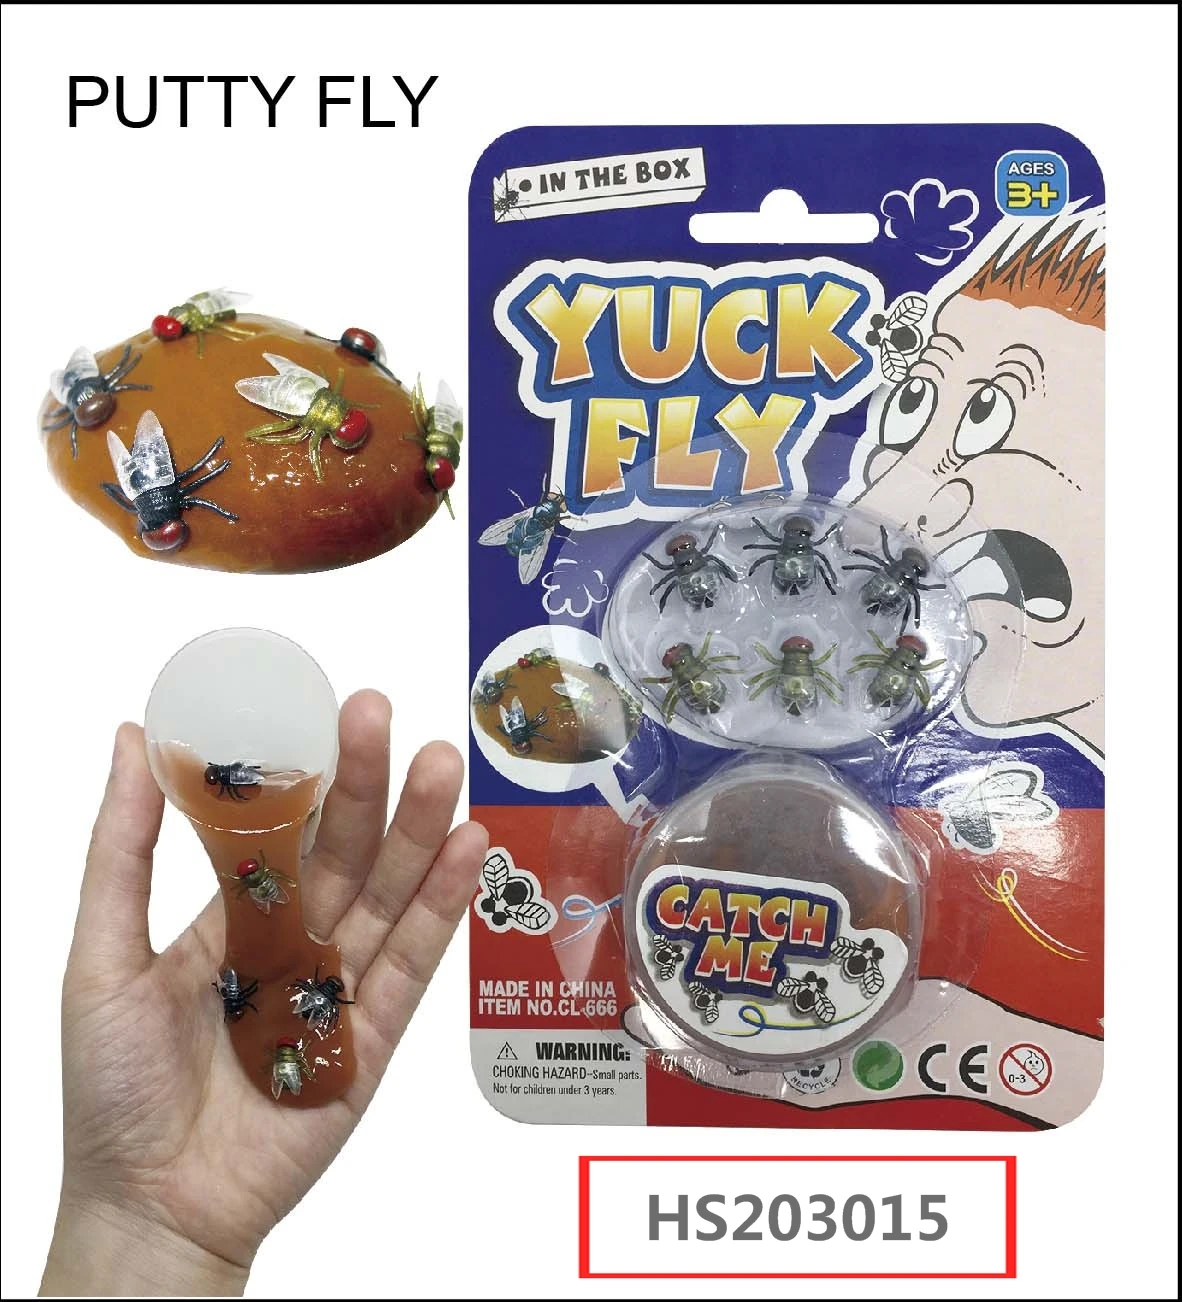 HS203015, Huwsin Toys, Noise putty,Yuck fly, Whole person toy